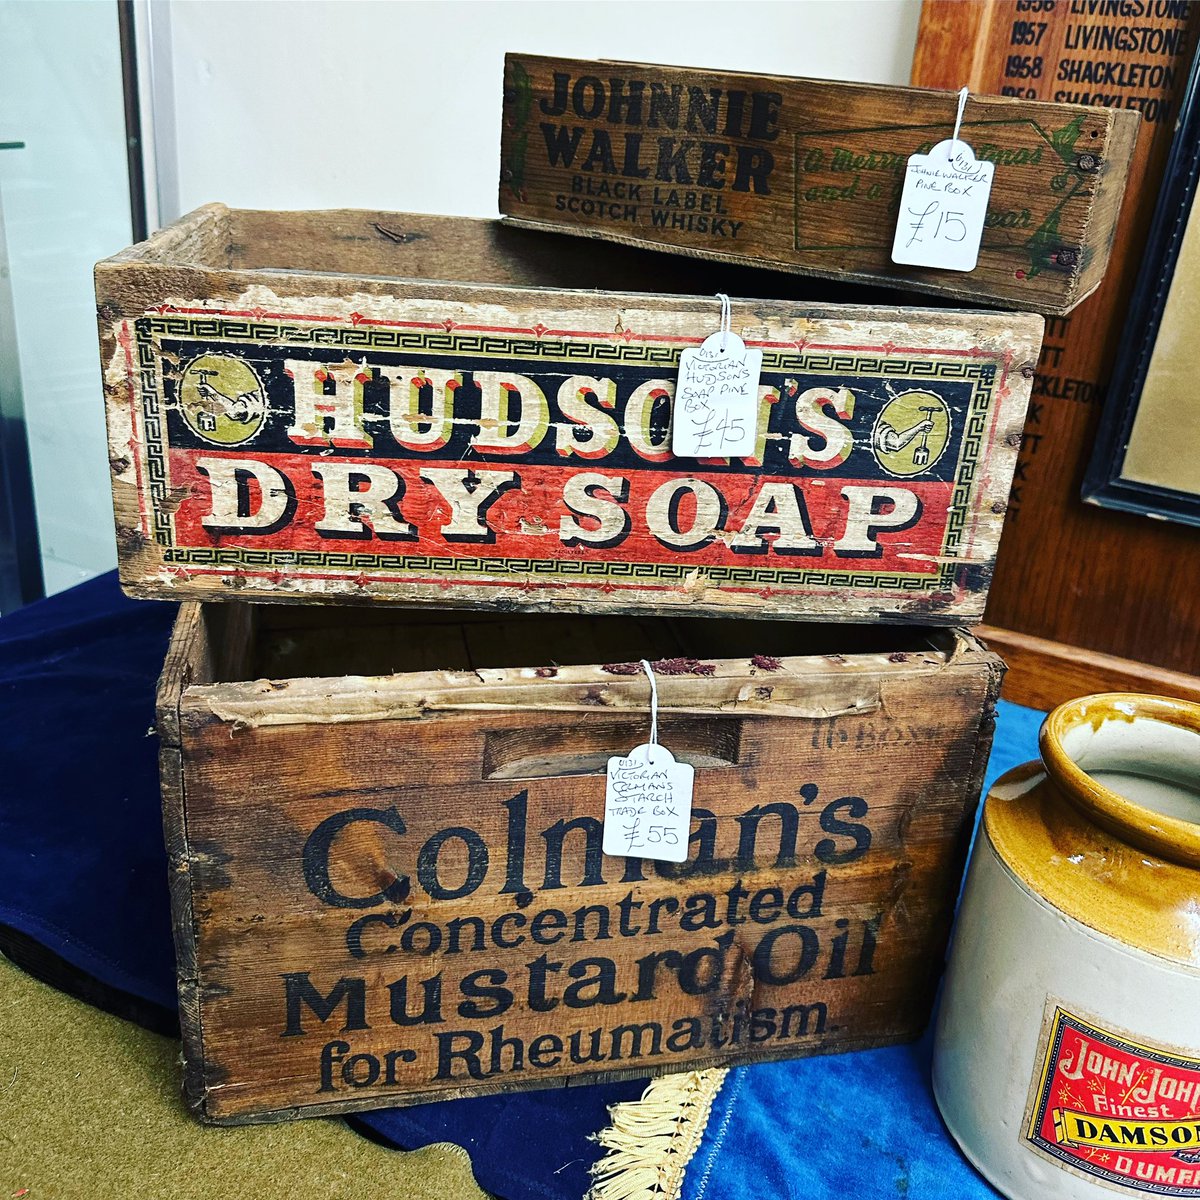 Vintage advertising boxes are a great answer to stylish storage,perfect in the kitchen/bathroom. 
#vintageadvertising #colmansmustard #hudsonssoap #johnniewalker #boxes #crates #kitchen #bathroom #astraantiquescentre #hemswell #lincolnshire